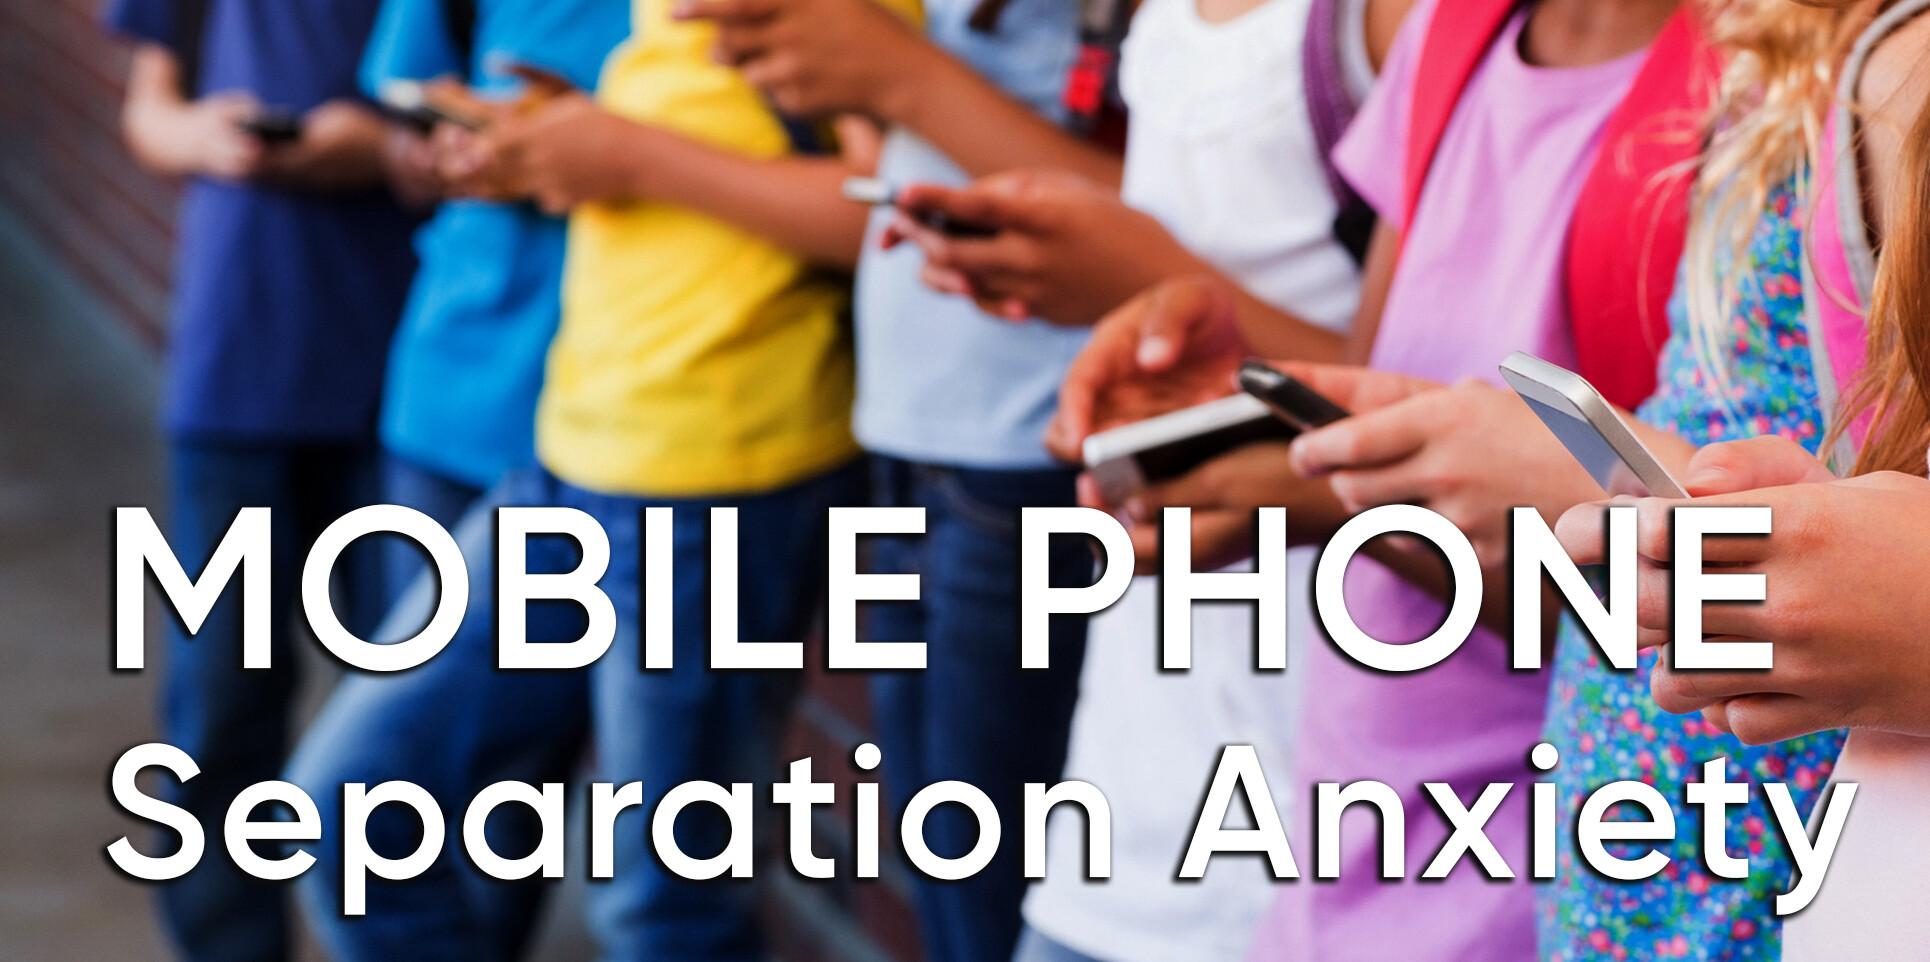 SchoolTV special report: mobile phone separation anxiety